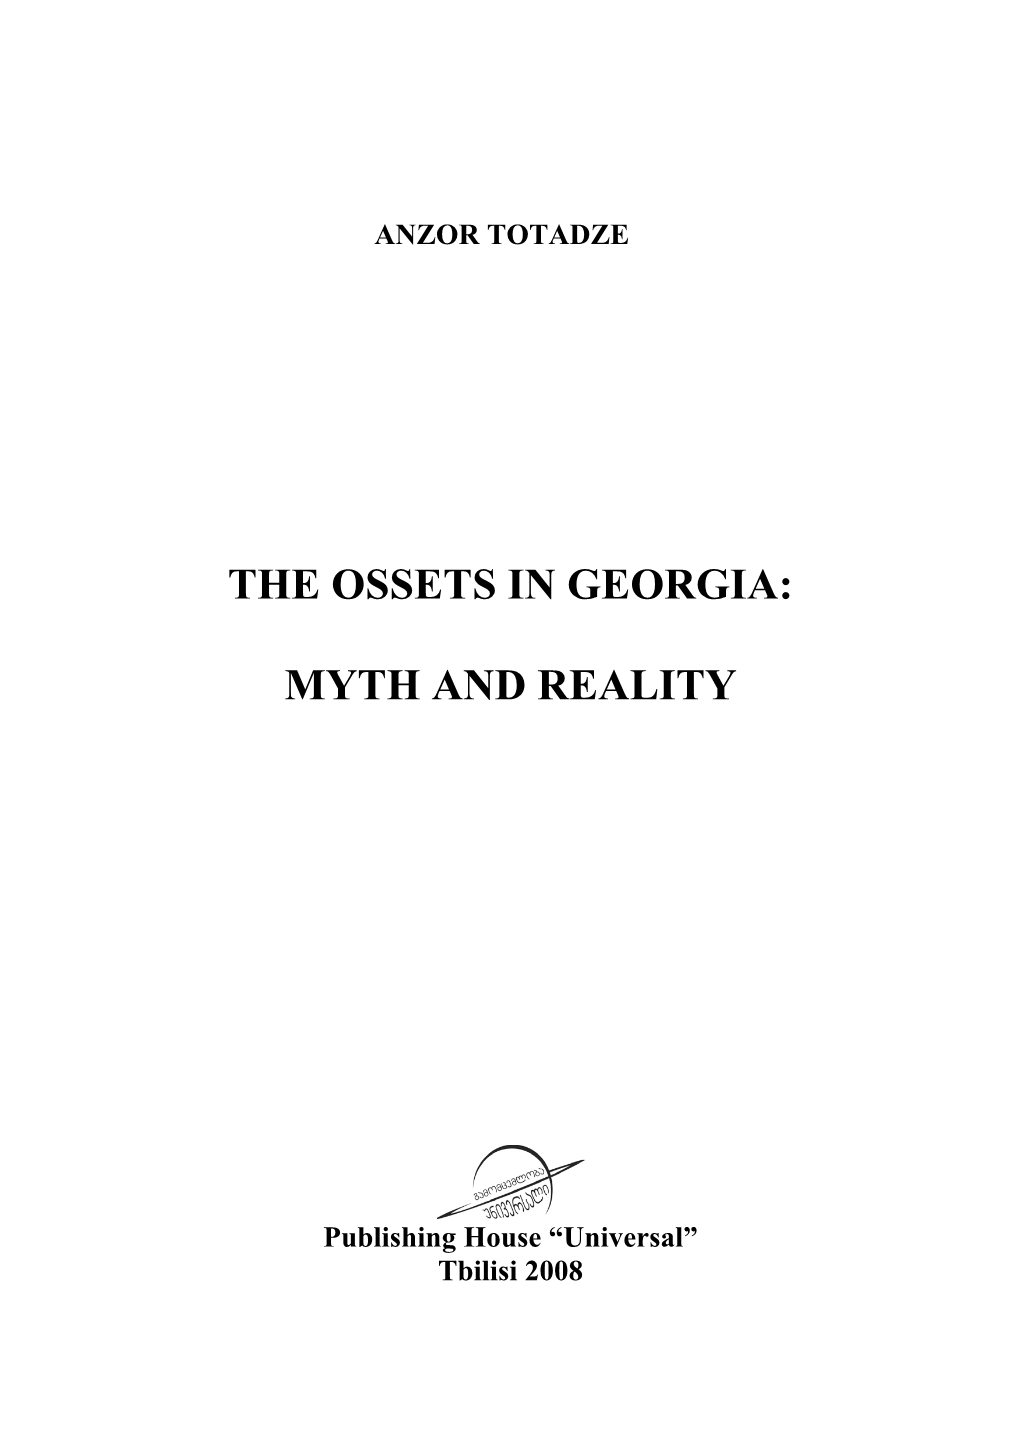 The Ossets in Georgia